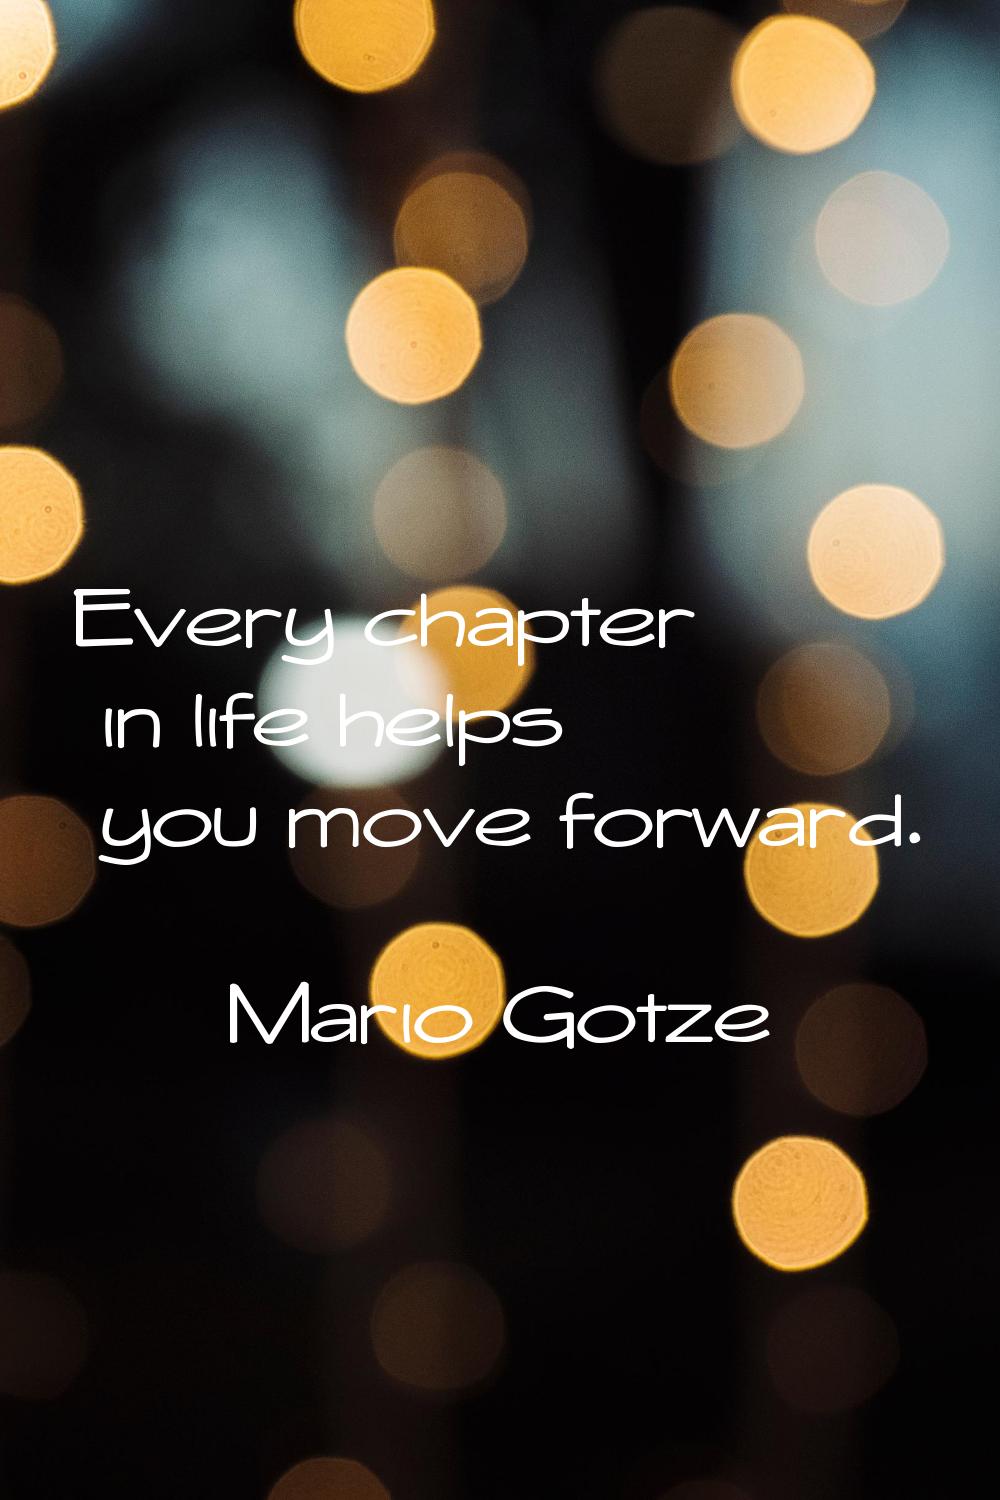 Every chapter in life helps you move forward.